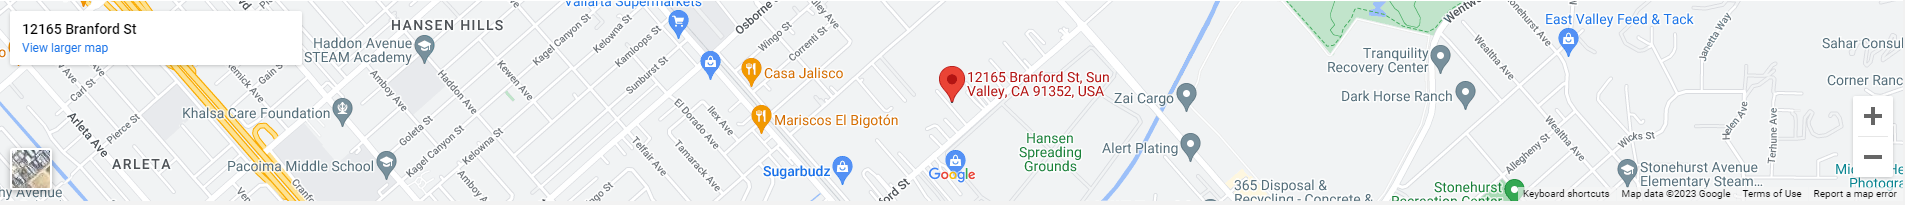 A map of the location of the business.